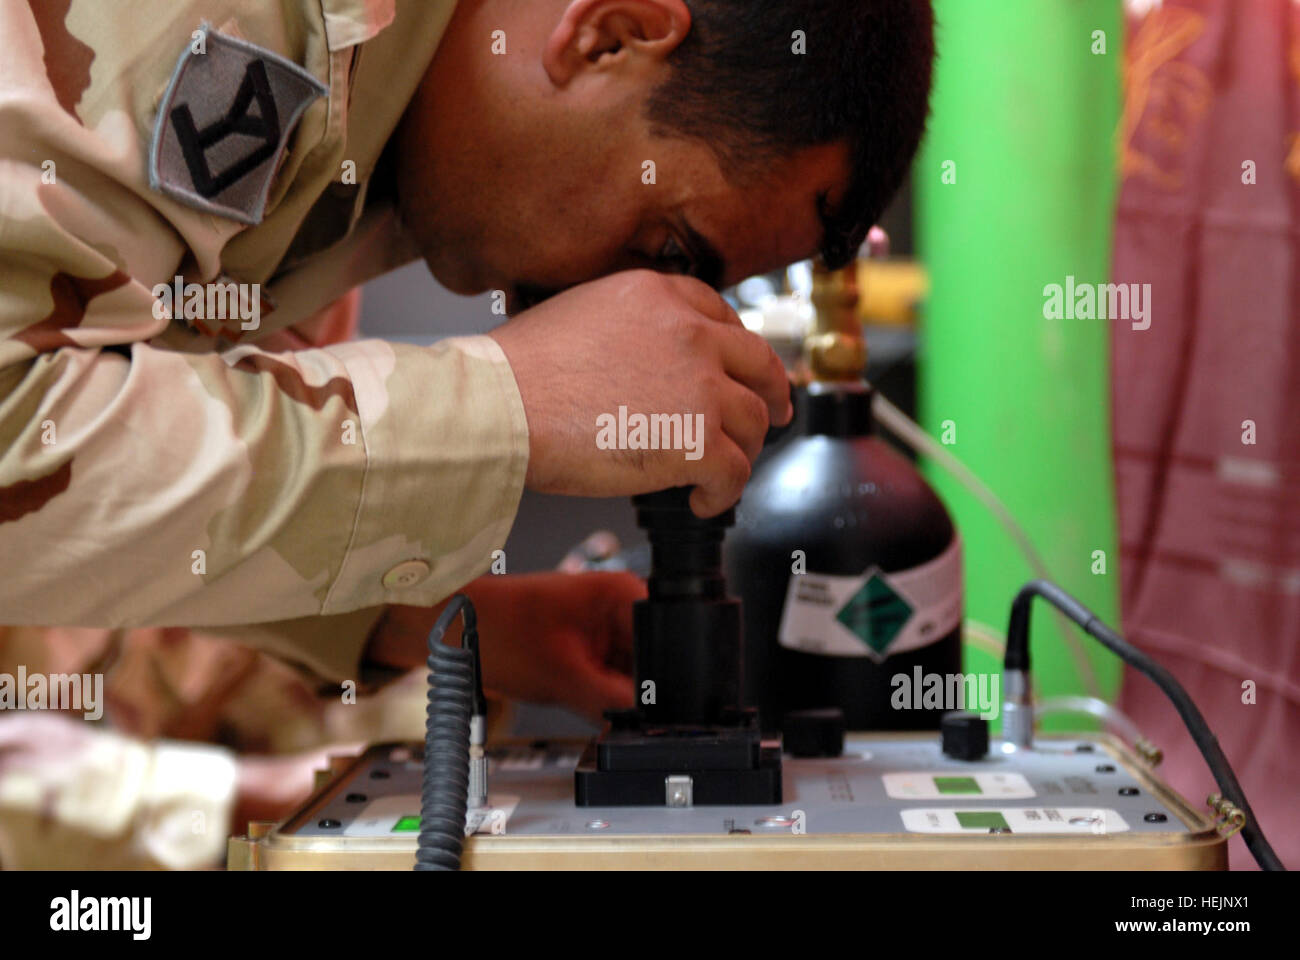 An Iraqi special operation forces soldier conducts maintenance on a set of night vision goggles at the 3rd Support Battalion's newly-formed night vision equipment repair shop located on a military compound in Baghdad, May 19. This is the first ISOF repair shop in the country that specializes in night vision equipment maintenance. New night vision maintenance shop allows 'Iraqi Special Operations Forces to own the night' 176997 Stock Photo